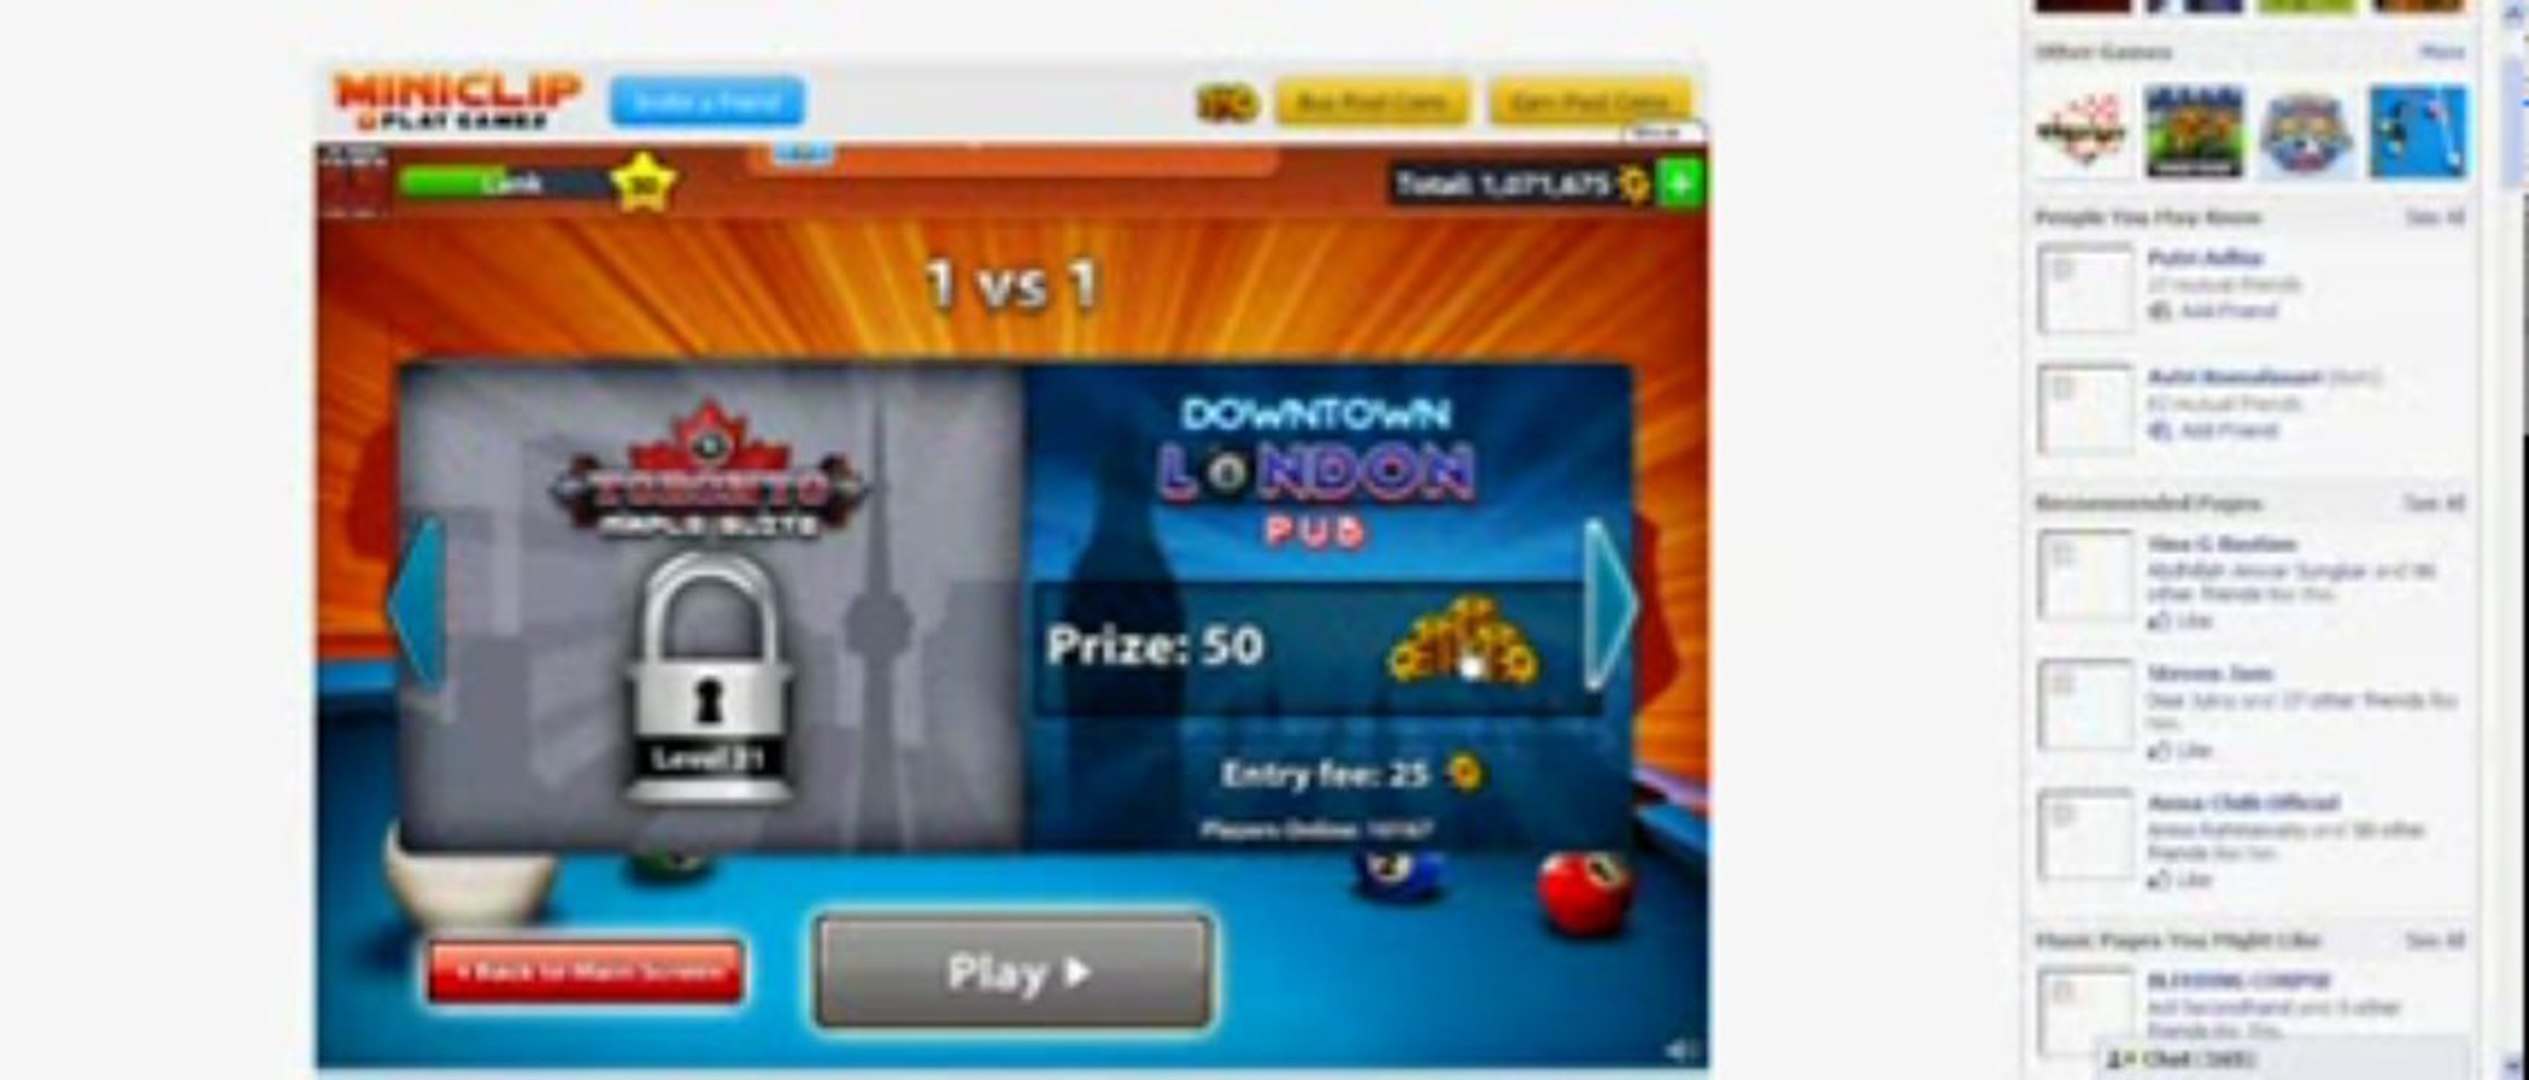 Tutorial Cheat Trick Coins 8ball Pool With Cheatengine Video Dailymotion